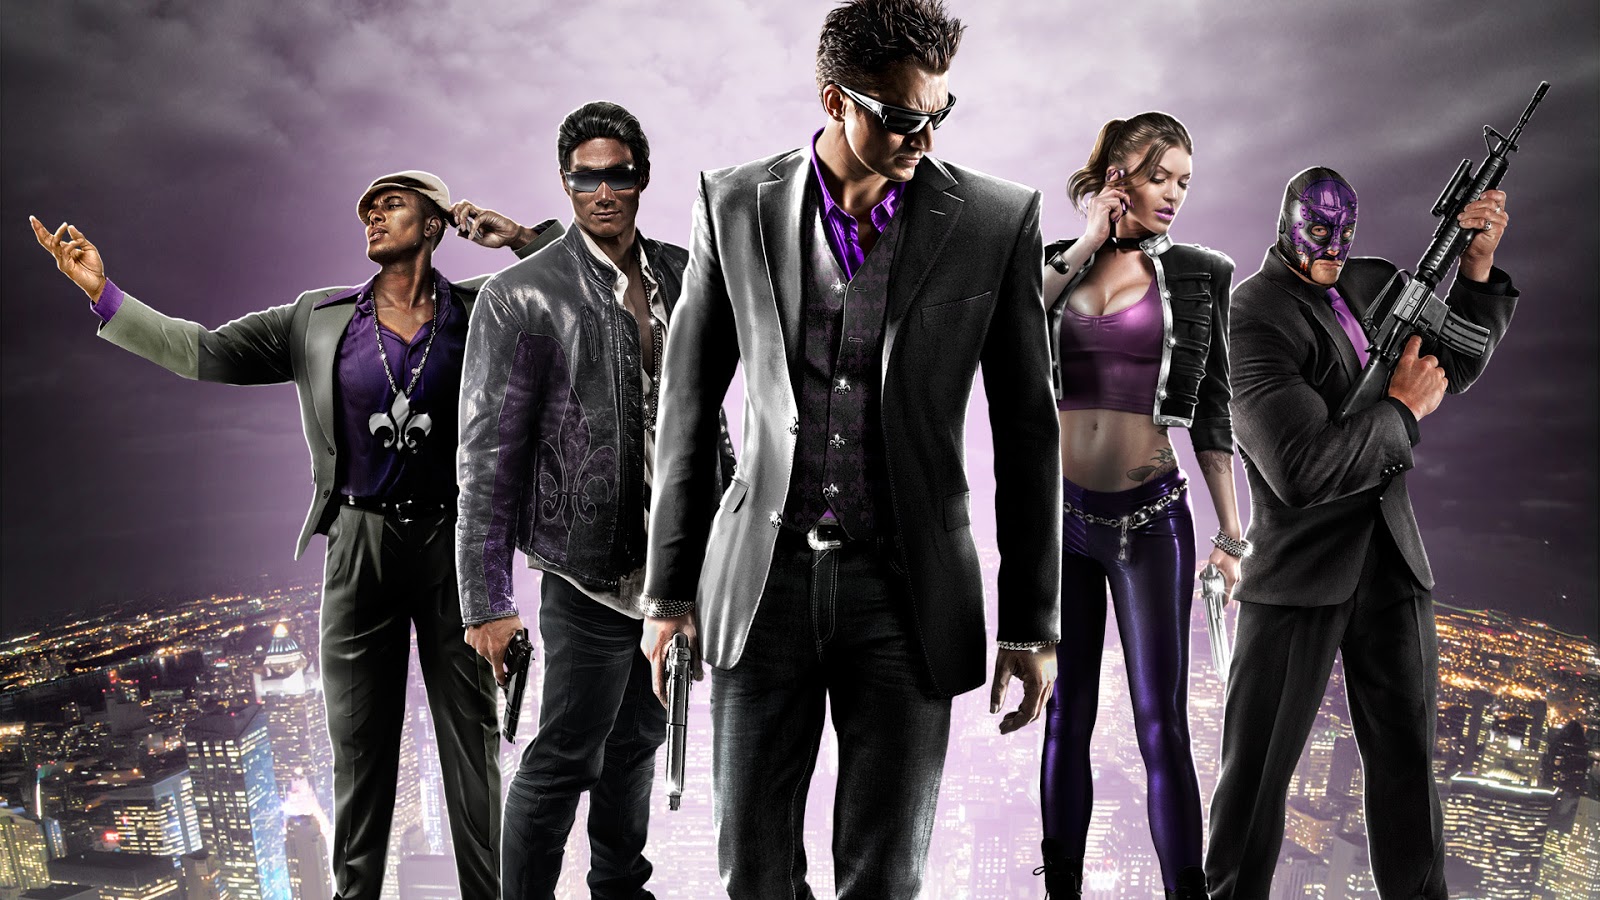 Here Are Some HD Wallpaper From Saints Row Game